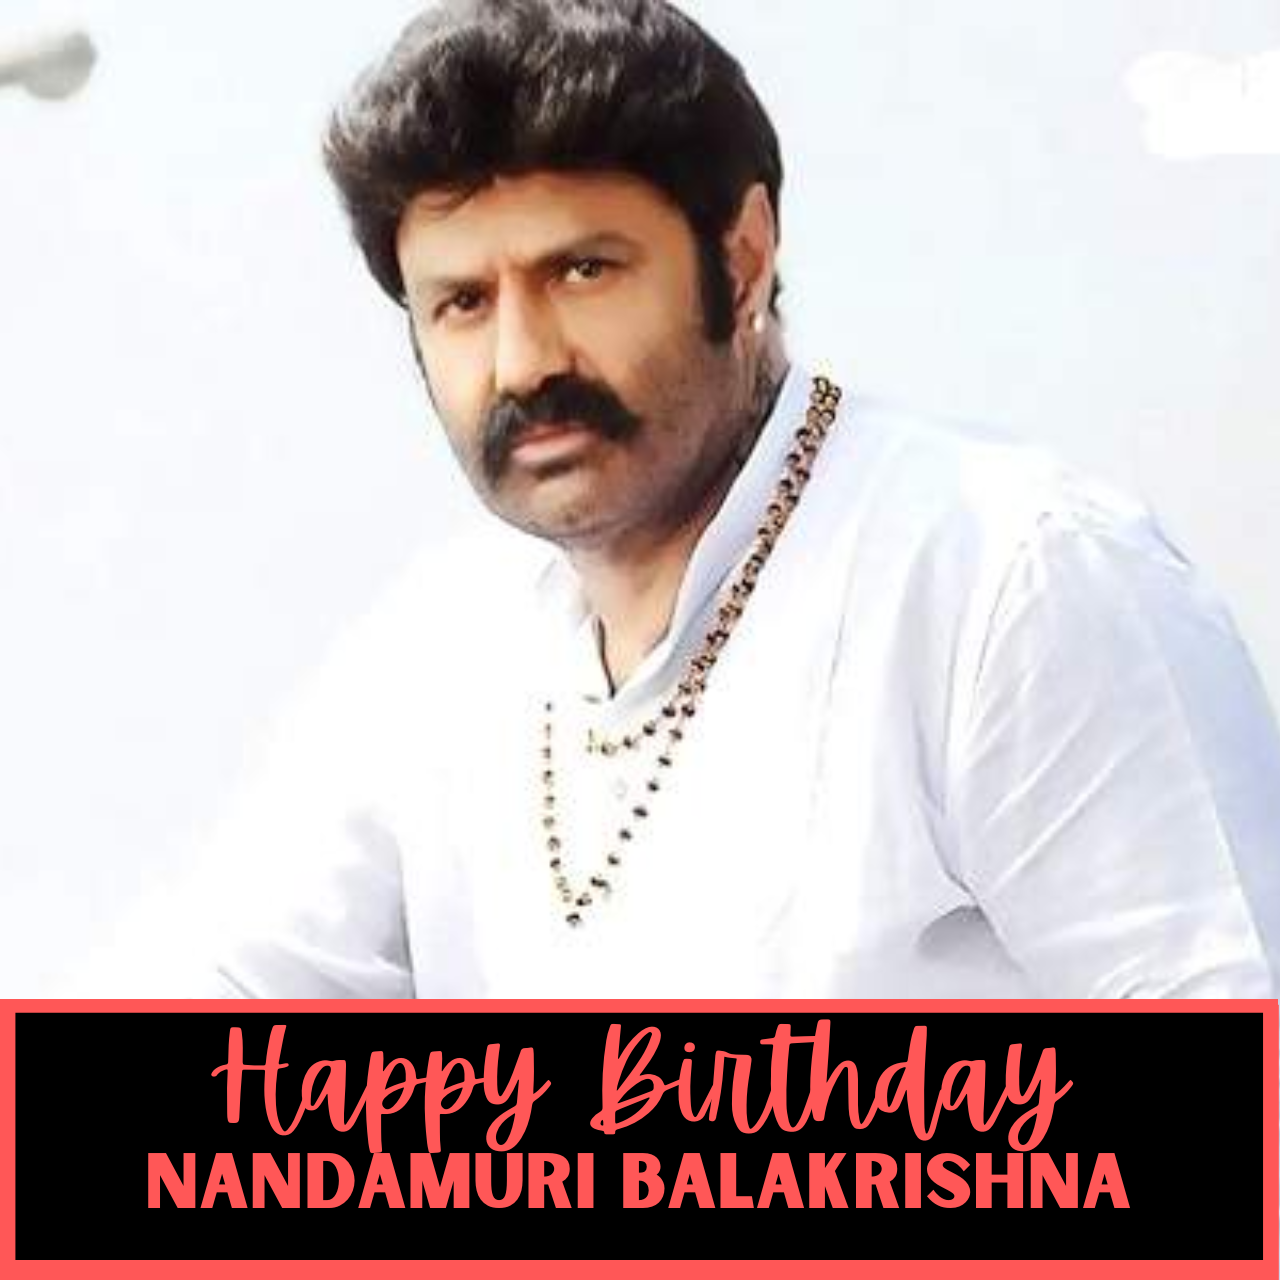 Happy Birthday Nandamuri Balakrishna: Wishes, Images, Quotes, Messages, Greetings, Posters, and Status to greet 'Balayya'